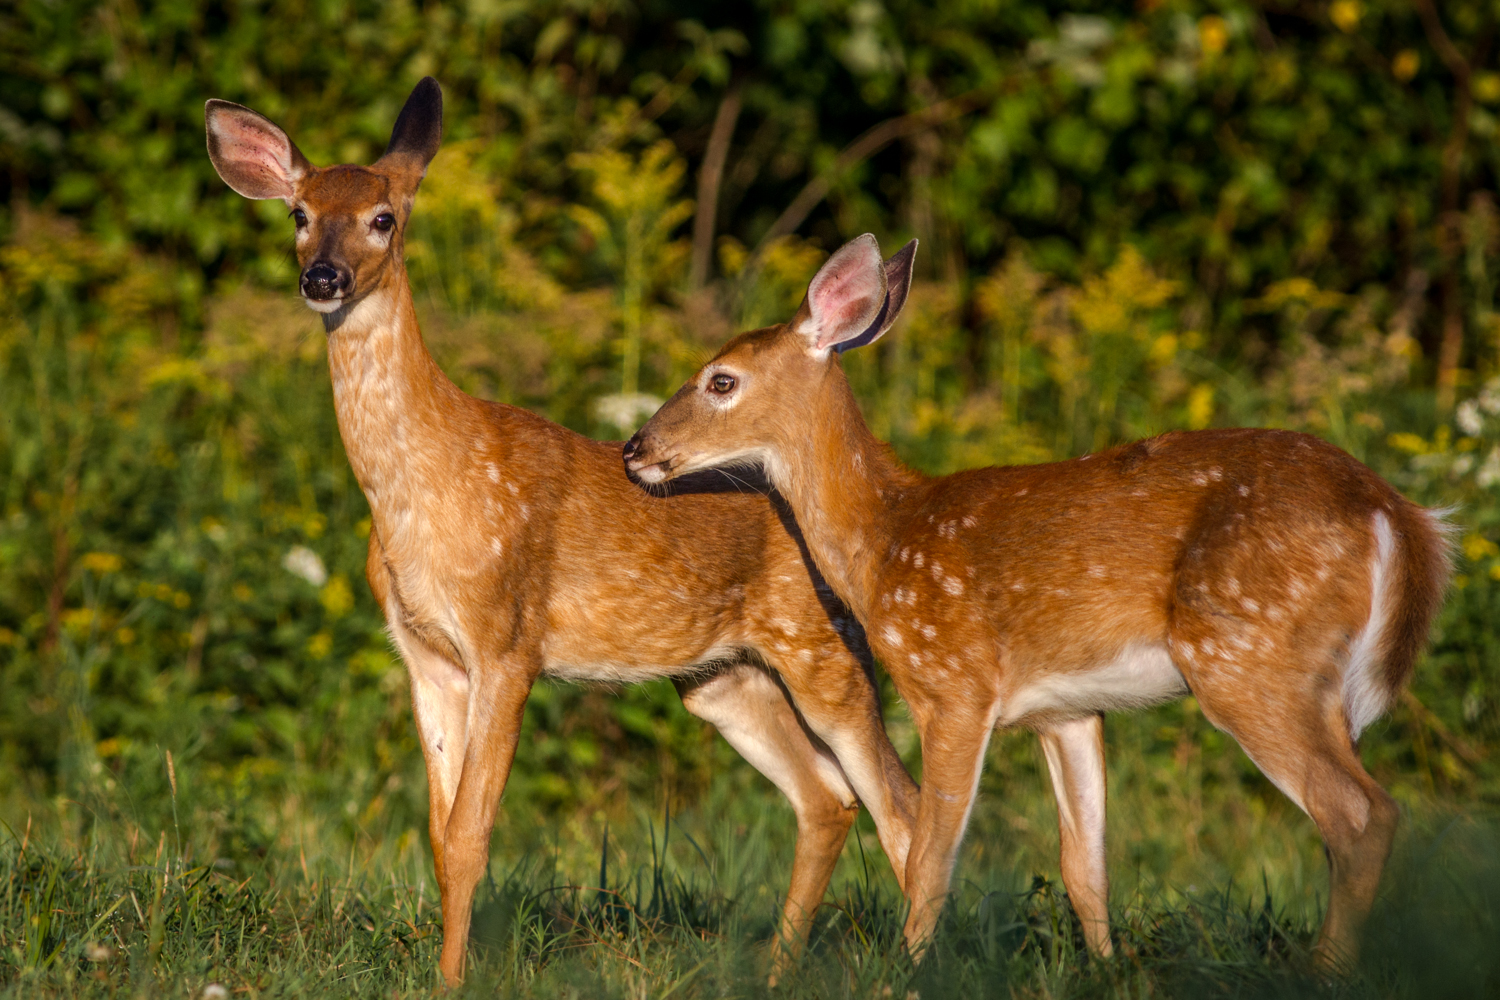 two young deer in an outdoor field with trees and bushes